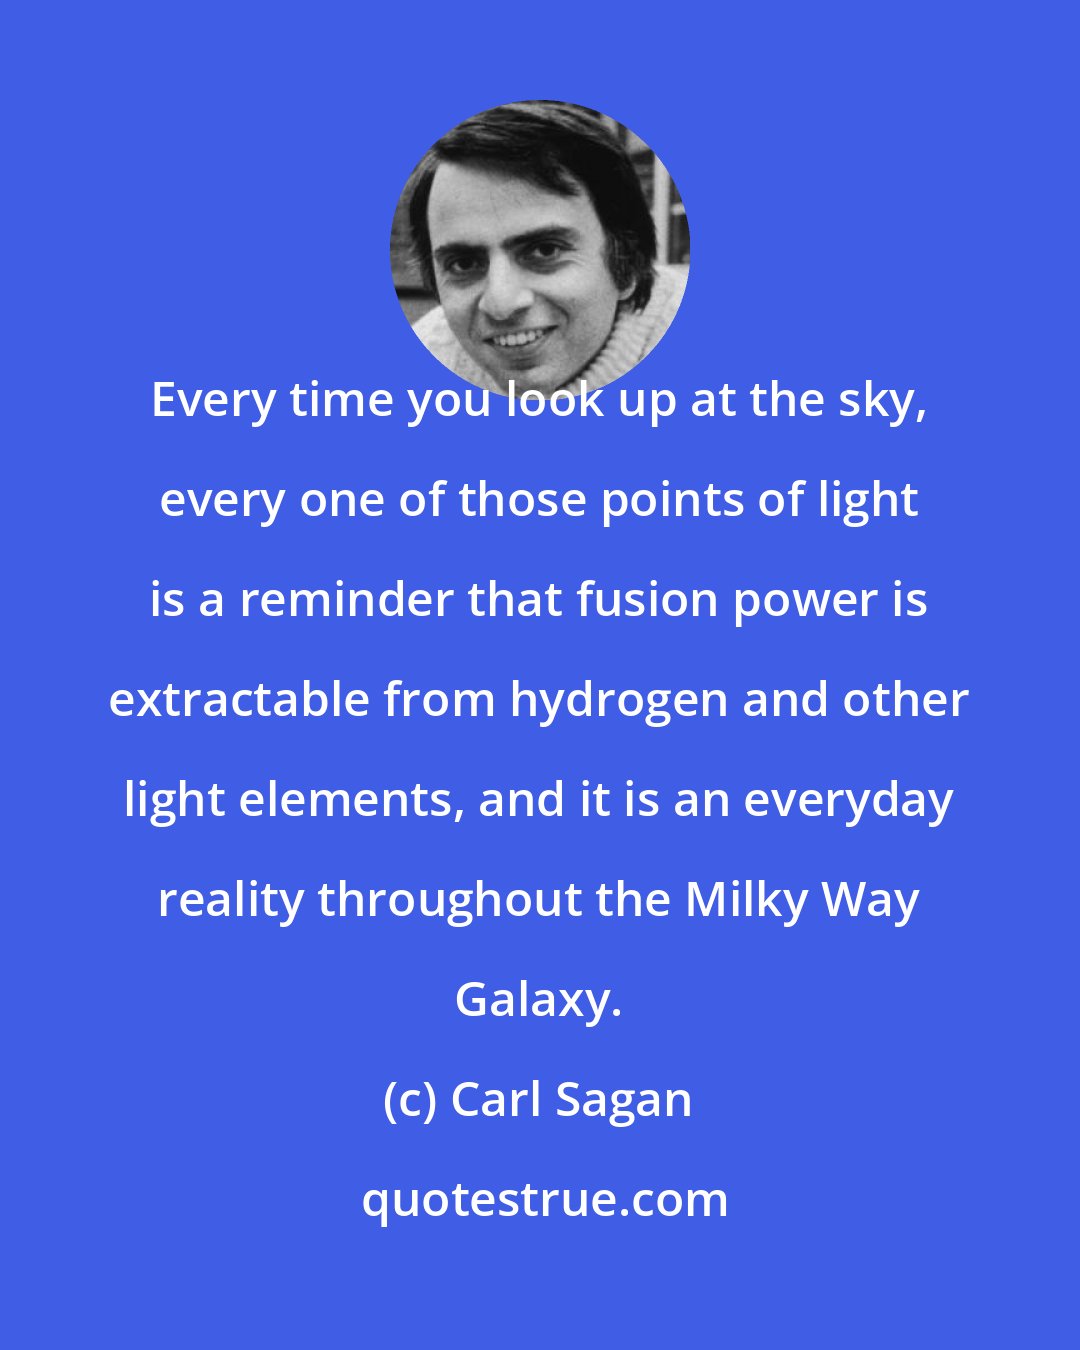 Carl Sagan: Every time you look up at the sky, every one of those points of light is a reminder that fusion power is extractable from hydrogen and other light elements, and it is an everyday reality throughout the Milky Way Galaxy.